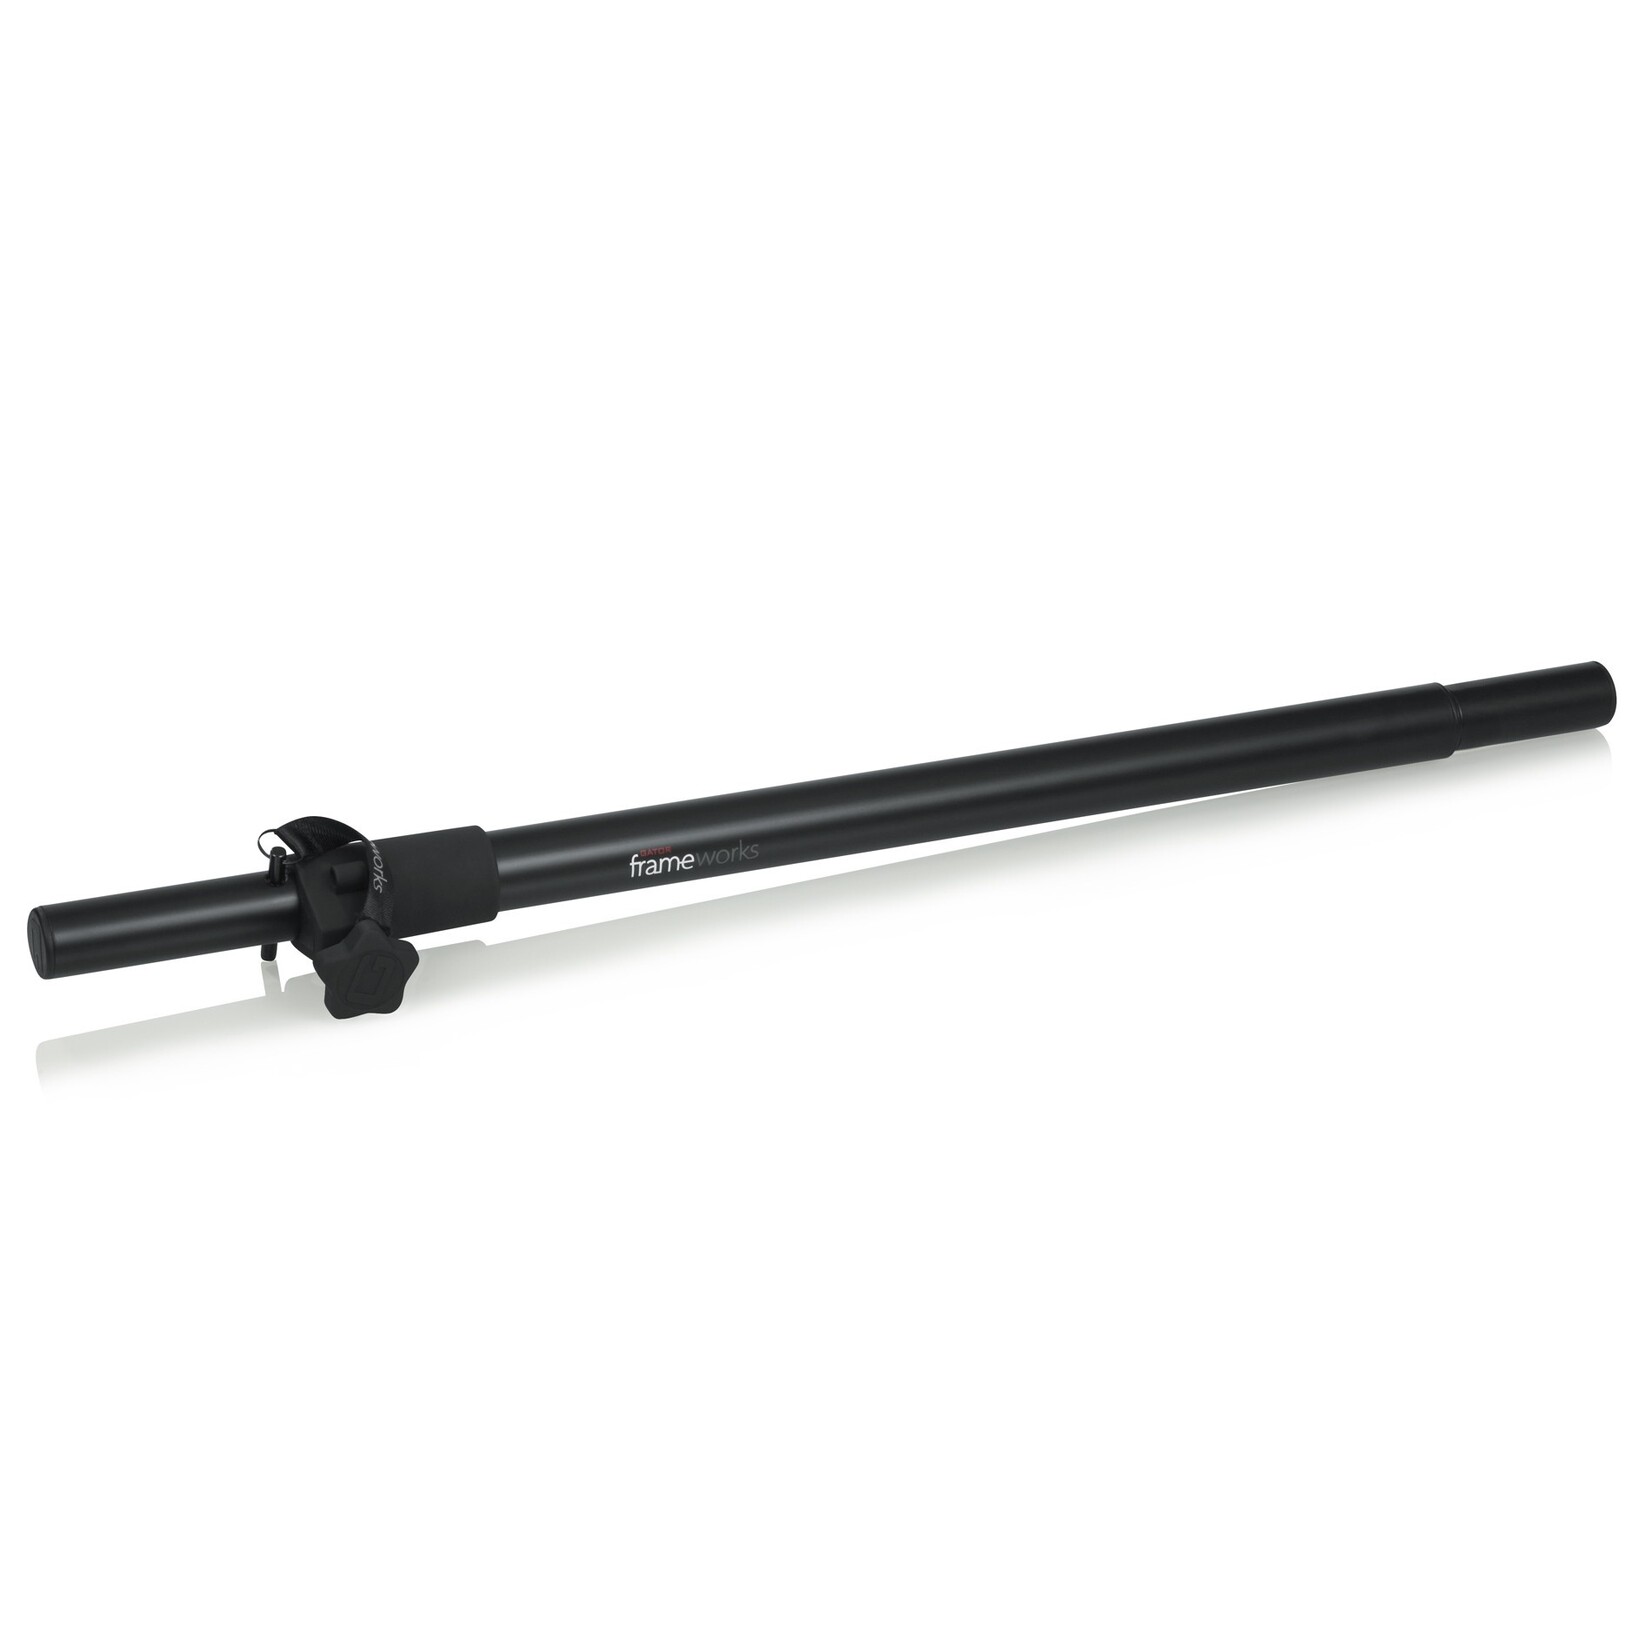 Gator Frameworks Standard Sub Pole with 20mm Adapter Included